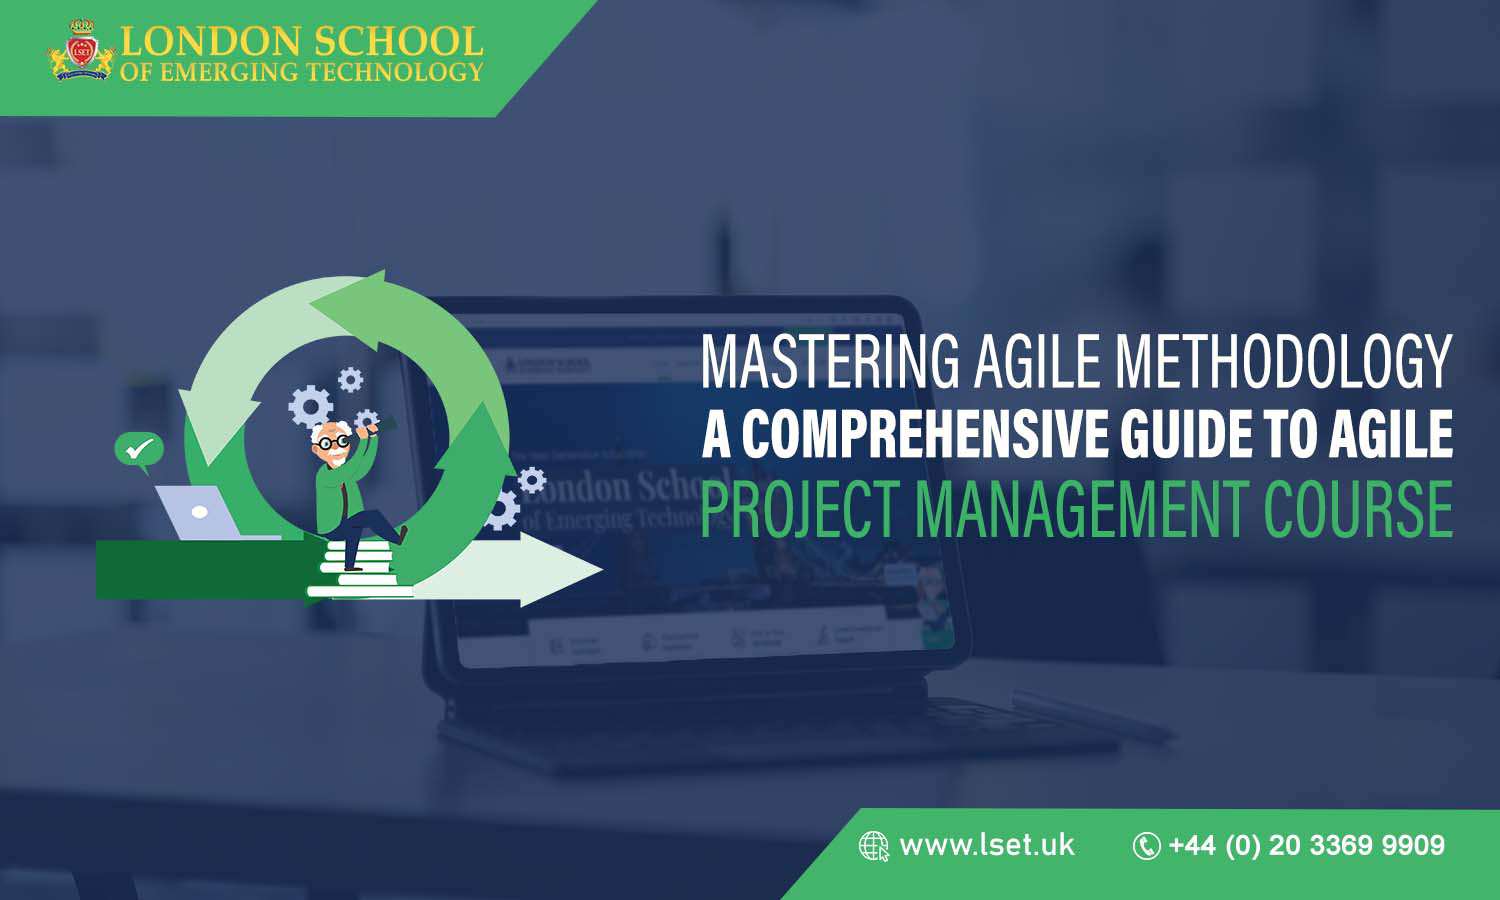 Mastering Agile Methodology A Comprehensive Guide to Agile Project Management Course